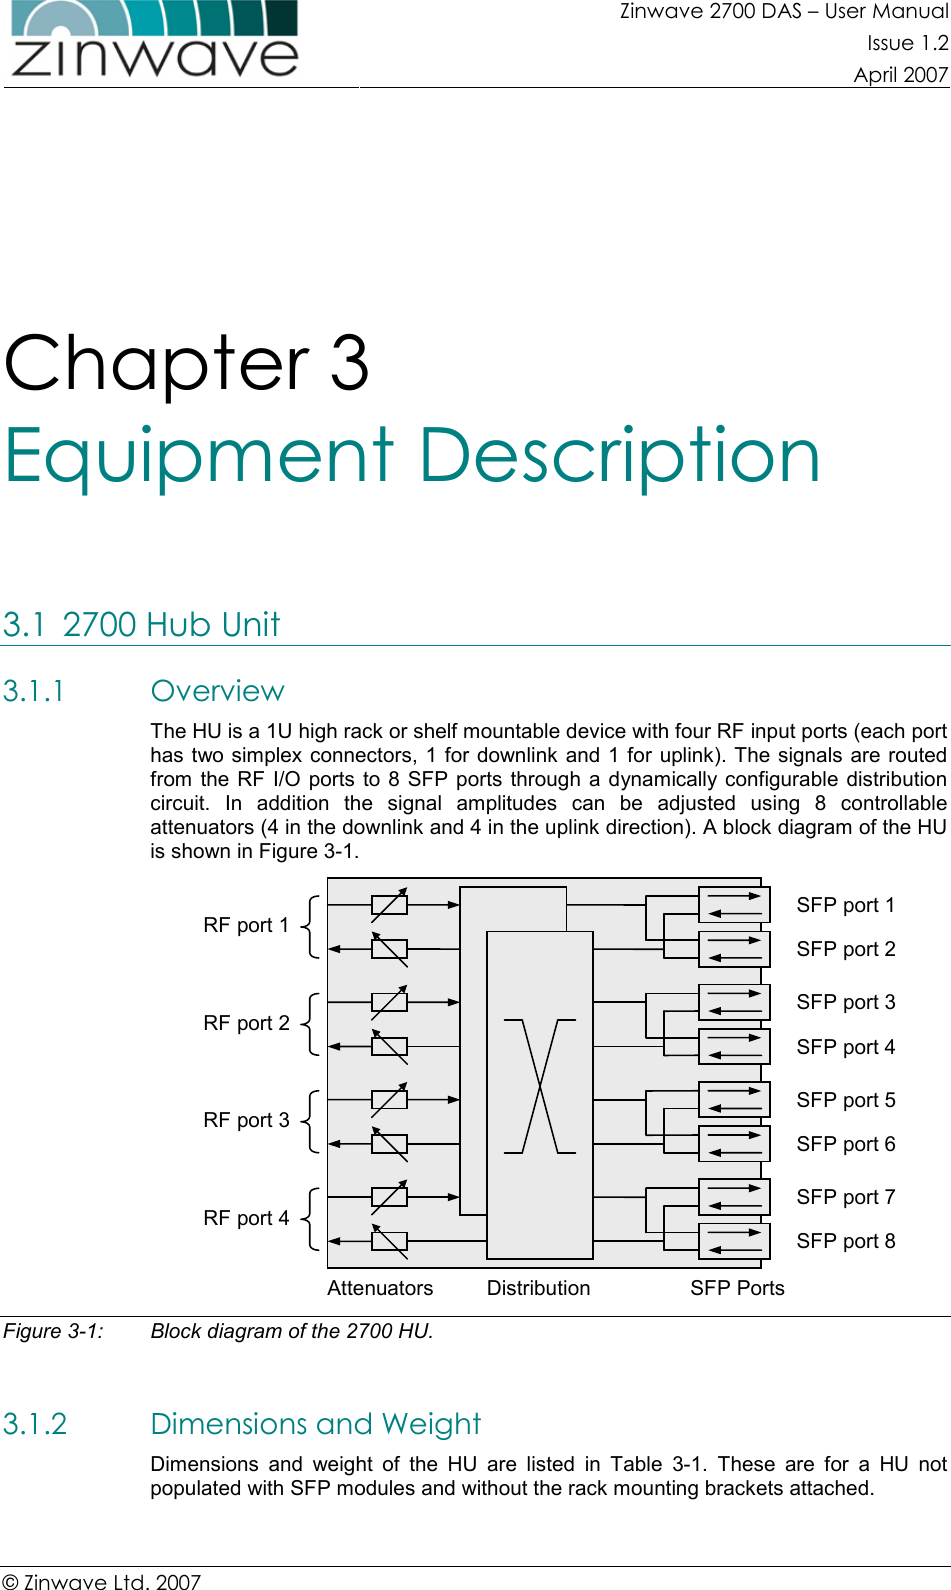 Zinwave 2700 DAS – User Manual Issue 1.2  April 2007  © Zinwave Ltd. 2007  Chapter 3  Equipment Description 3.1 2700 Hub Unit 3.1.1 Overview The HU is a 1U high rack or shelf mountable device with four RF input ports (each port has two simplex connectors, 1 for downlink and 1 for uplink). The signals are routed from the RF I/O  ports  to 8 SFP ports  through a dynamically configurable  distribution circuit.  In  addition  the  signal  amplitudes  can  be  adjusted  using  8  controllable attenuators (4 in the downlink and 4 in the uplink direction). A block diagram of the HU is shown in Figure 3-1.  Figure 3-1:  Block diagram of the 2700 HU.  3.1.2 Dimensions and Weight Dimensions  and  weight  of  the  HU  are  listed  in  Table  3-1.  These  are  for  a  HU  not populated with SFP modules and without the rack mounting brackets attached.  SFP Ports Attenuators  Distribution RF port 1 RF port 2 RF port 3 RF port 4 SFP port 1 SFP port 2 SFP port 3 SFP port 4 SFP port 5 SFP port 6 SFP port 7 SFP port 8 